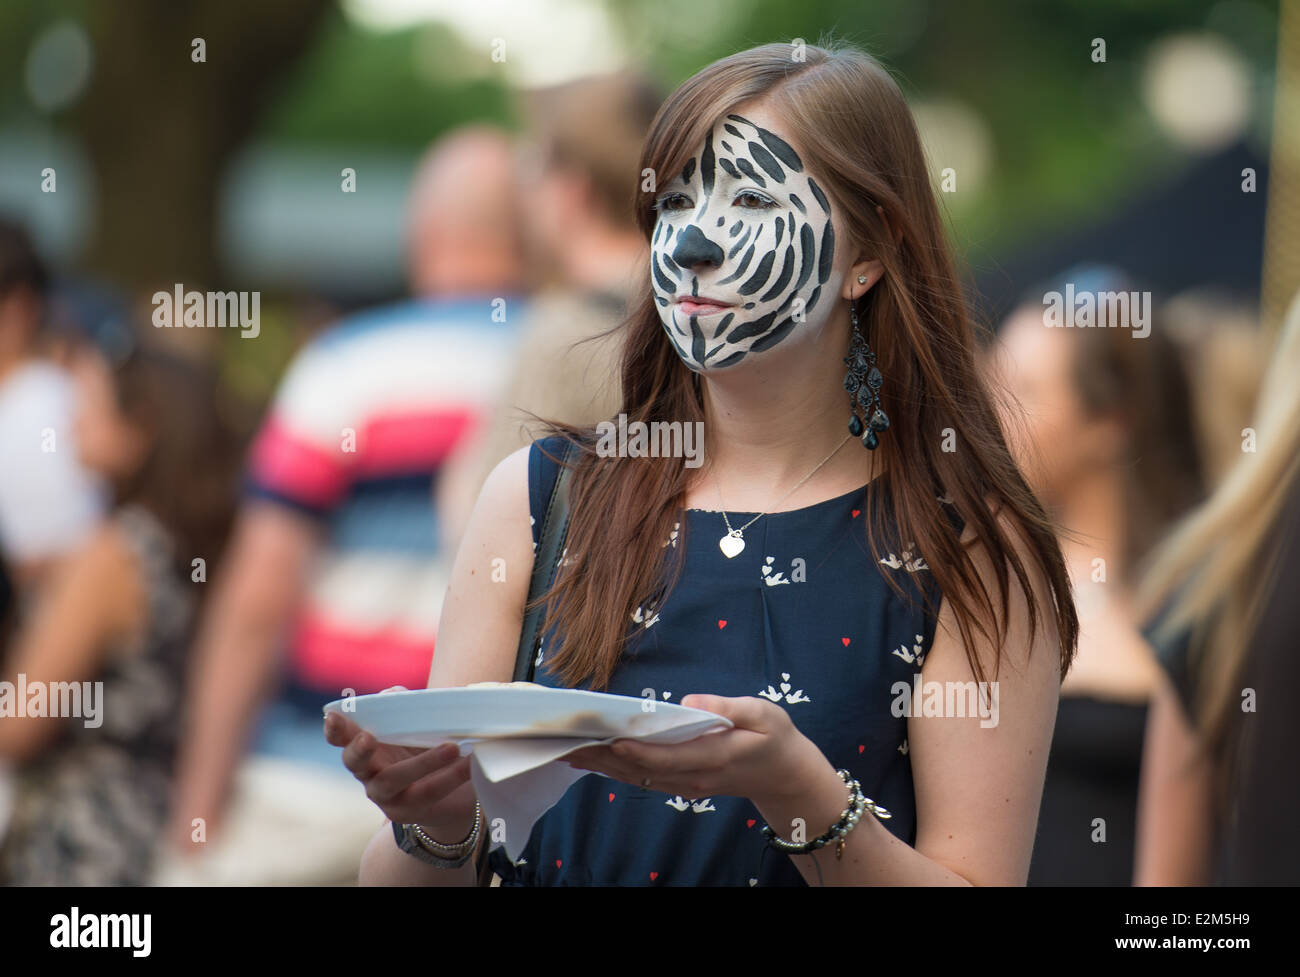 London Zoo June 2014 evening event. Lady wearing animal face paint. Stock Photo